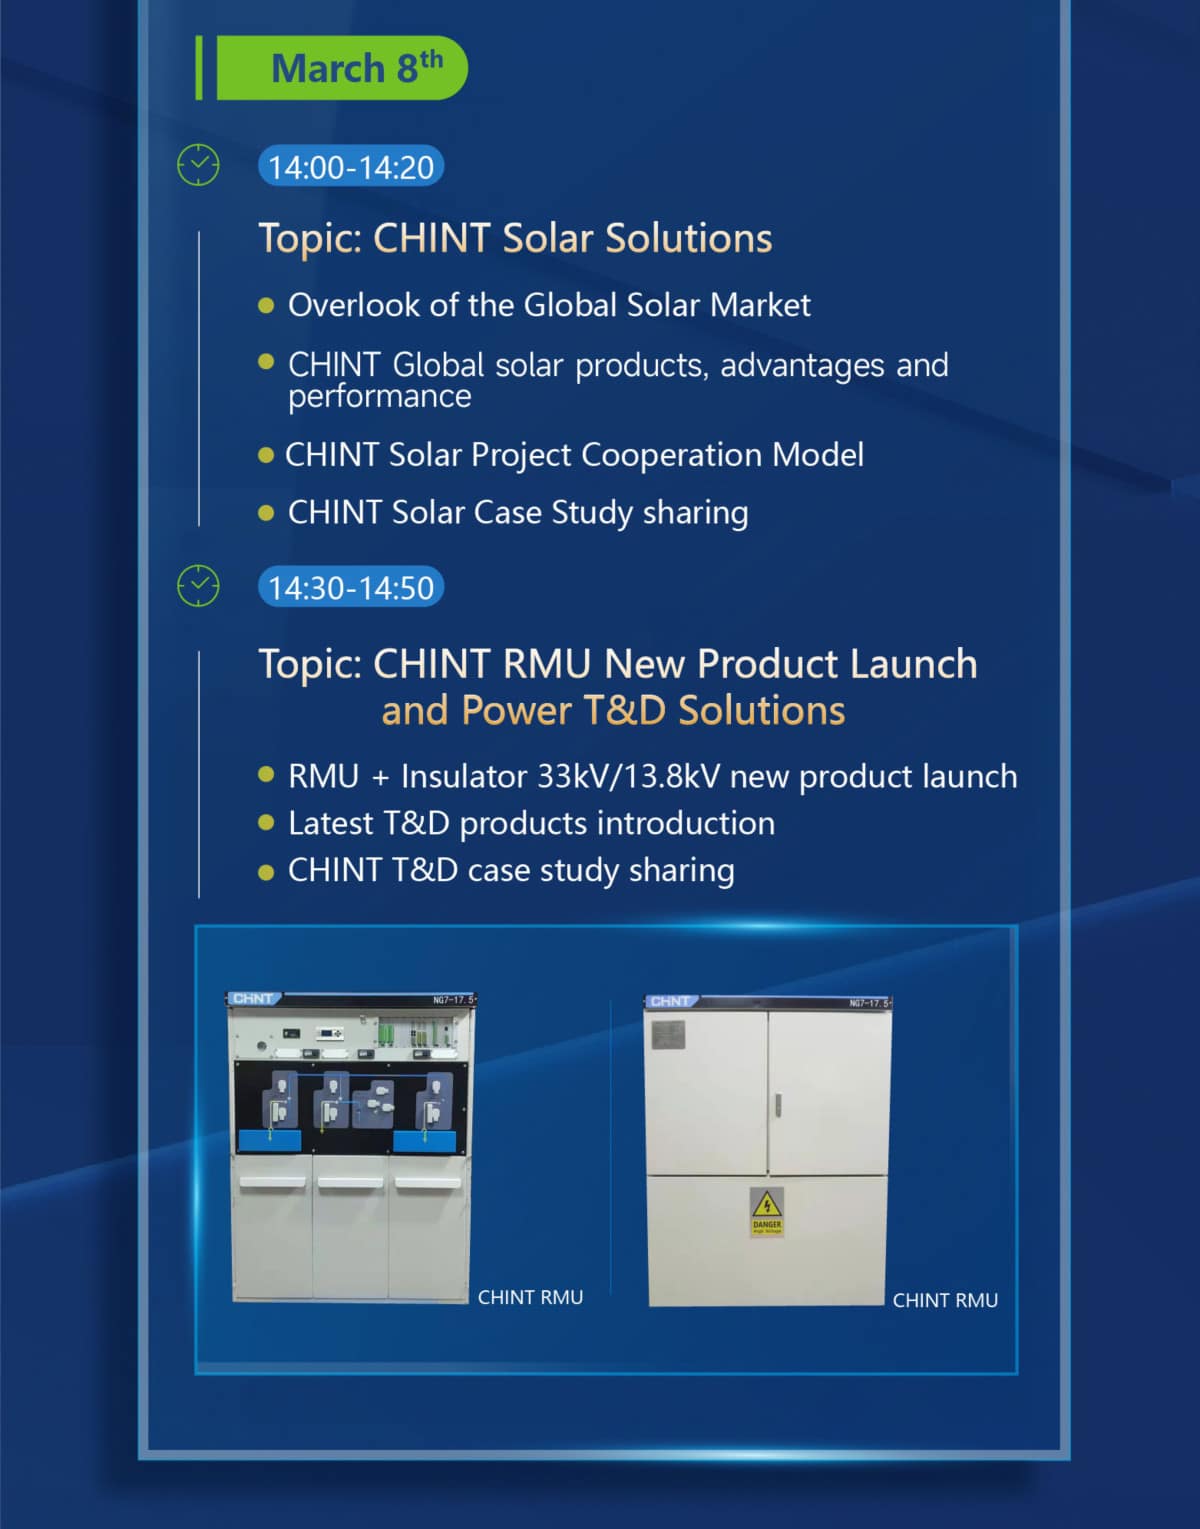 CHINT Solar Solutions